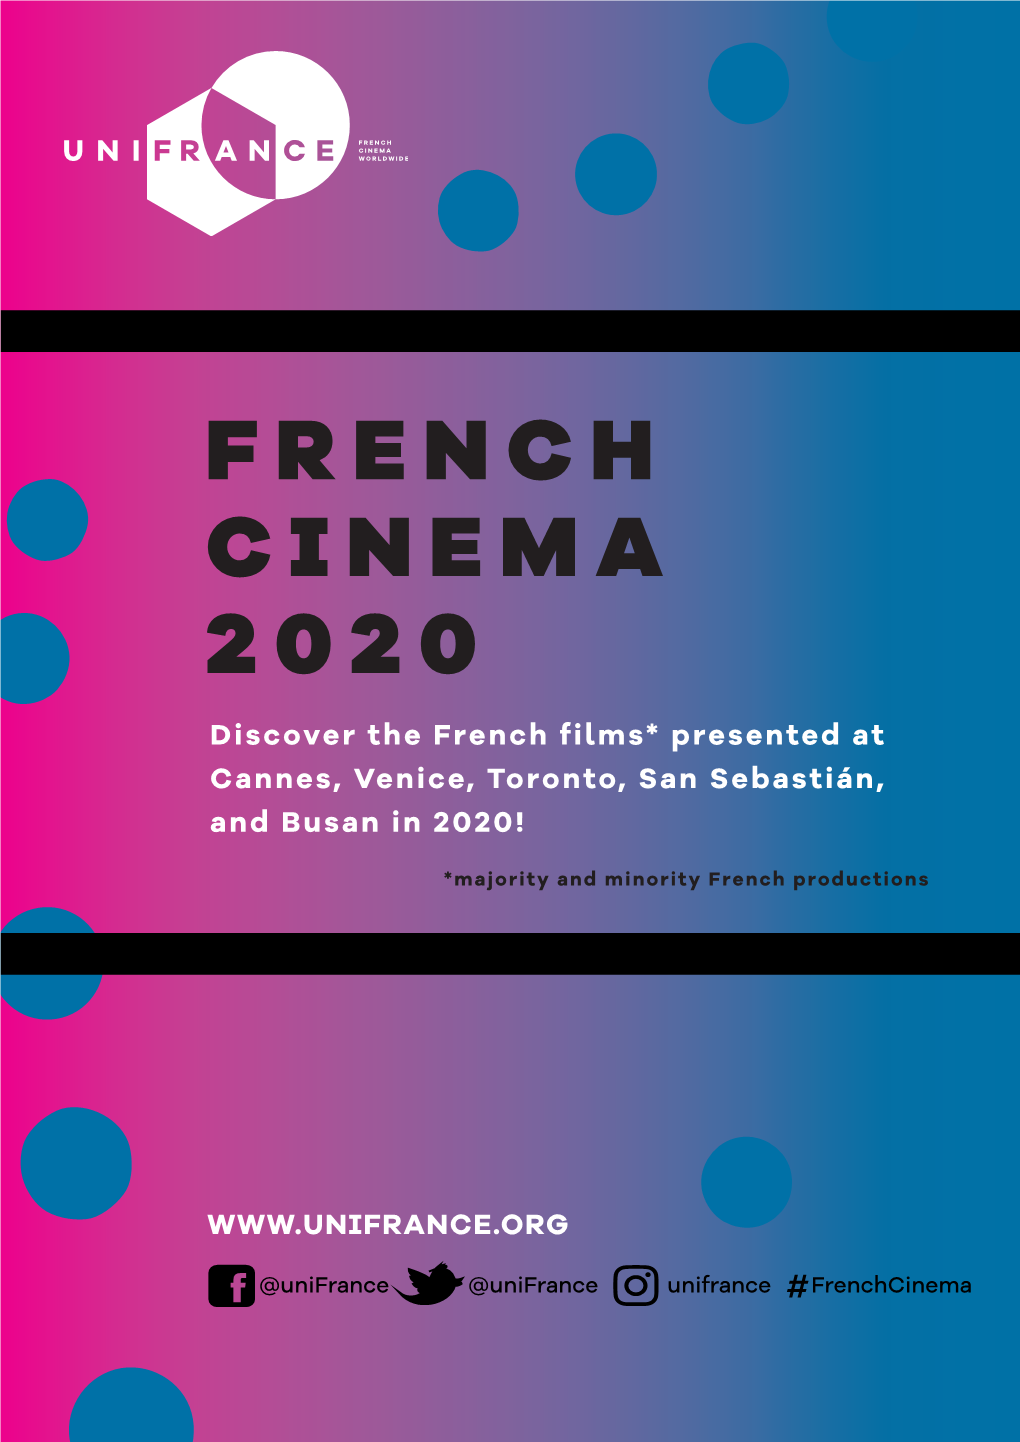 FRENCH CINEMA 2020 Discover the French Films* Presented at Cannes, Venice, Toronto, San Sebastián, and Busan in 2020!